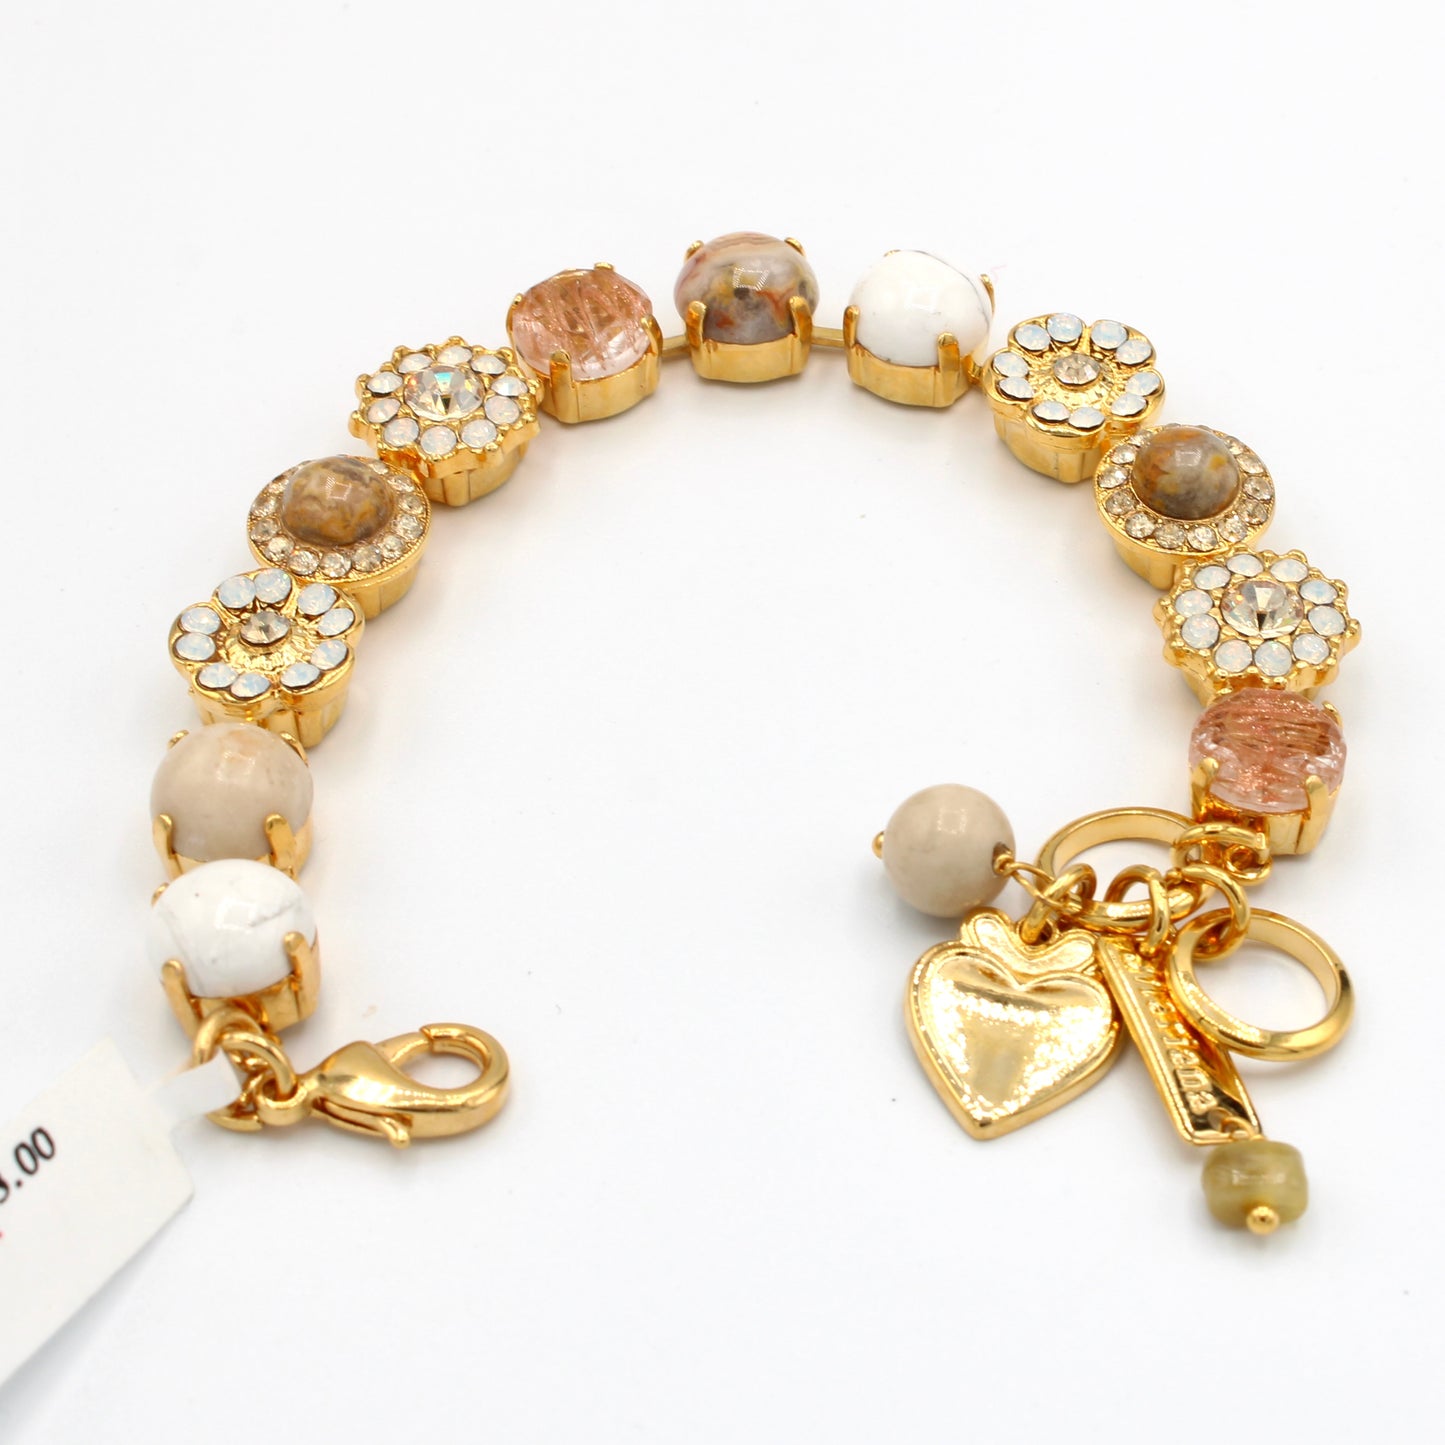 Sandman Large Crystal and Mineral Bracelet in Yellow Gold